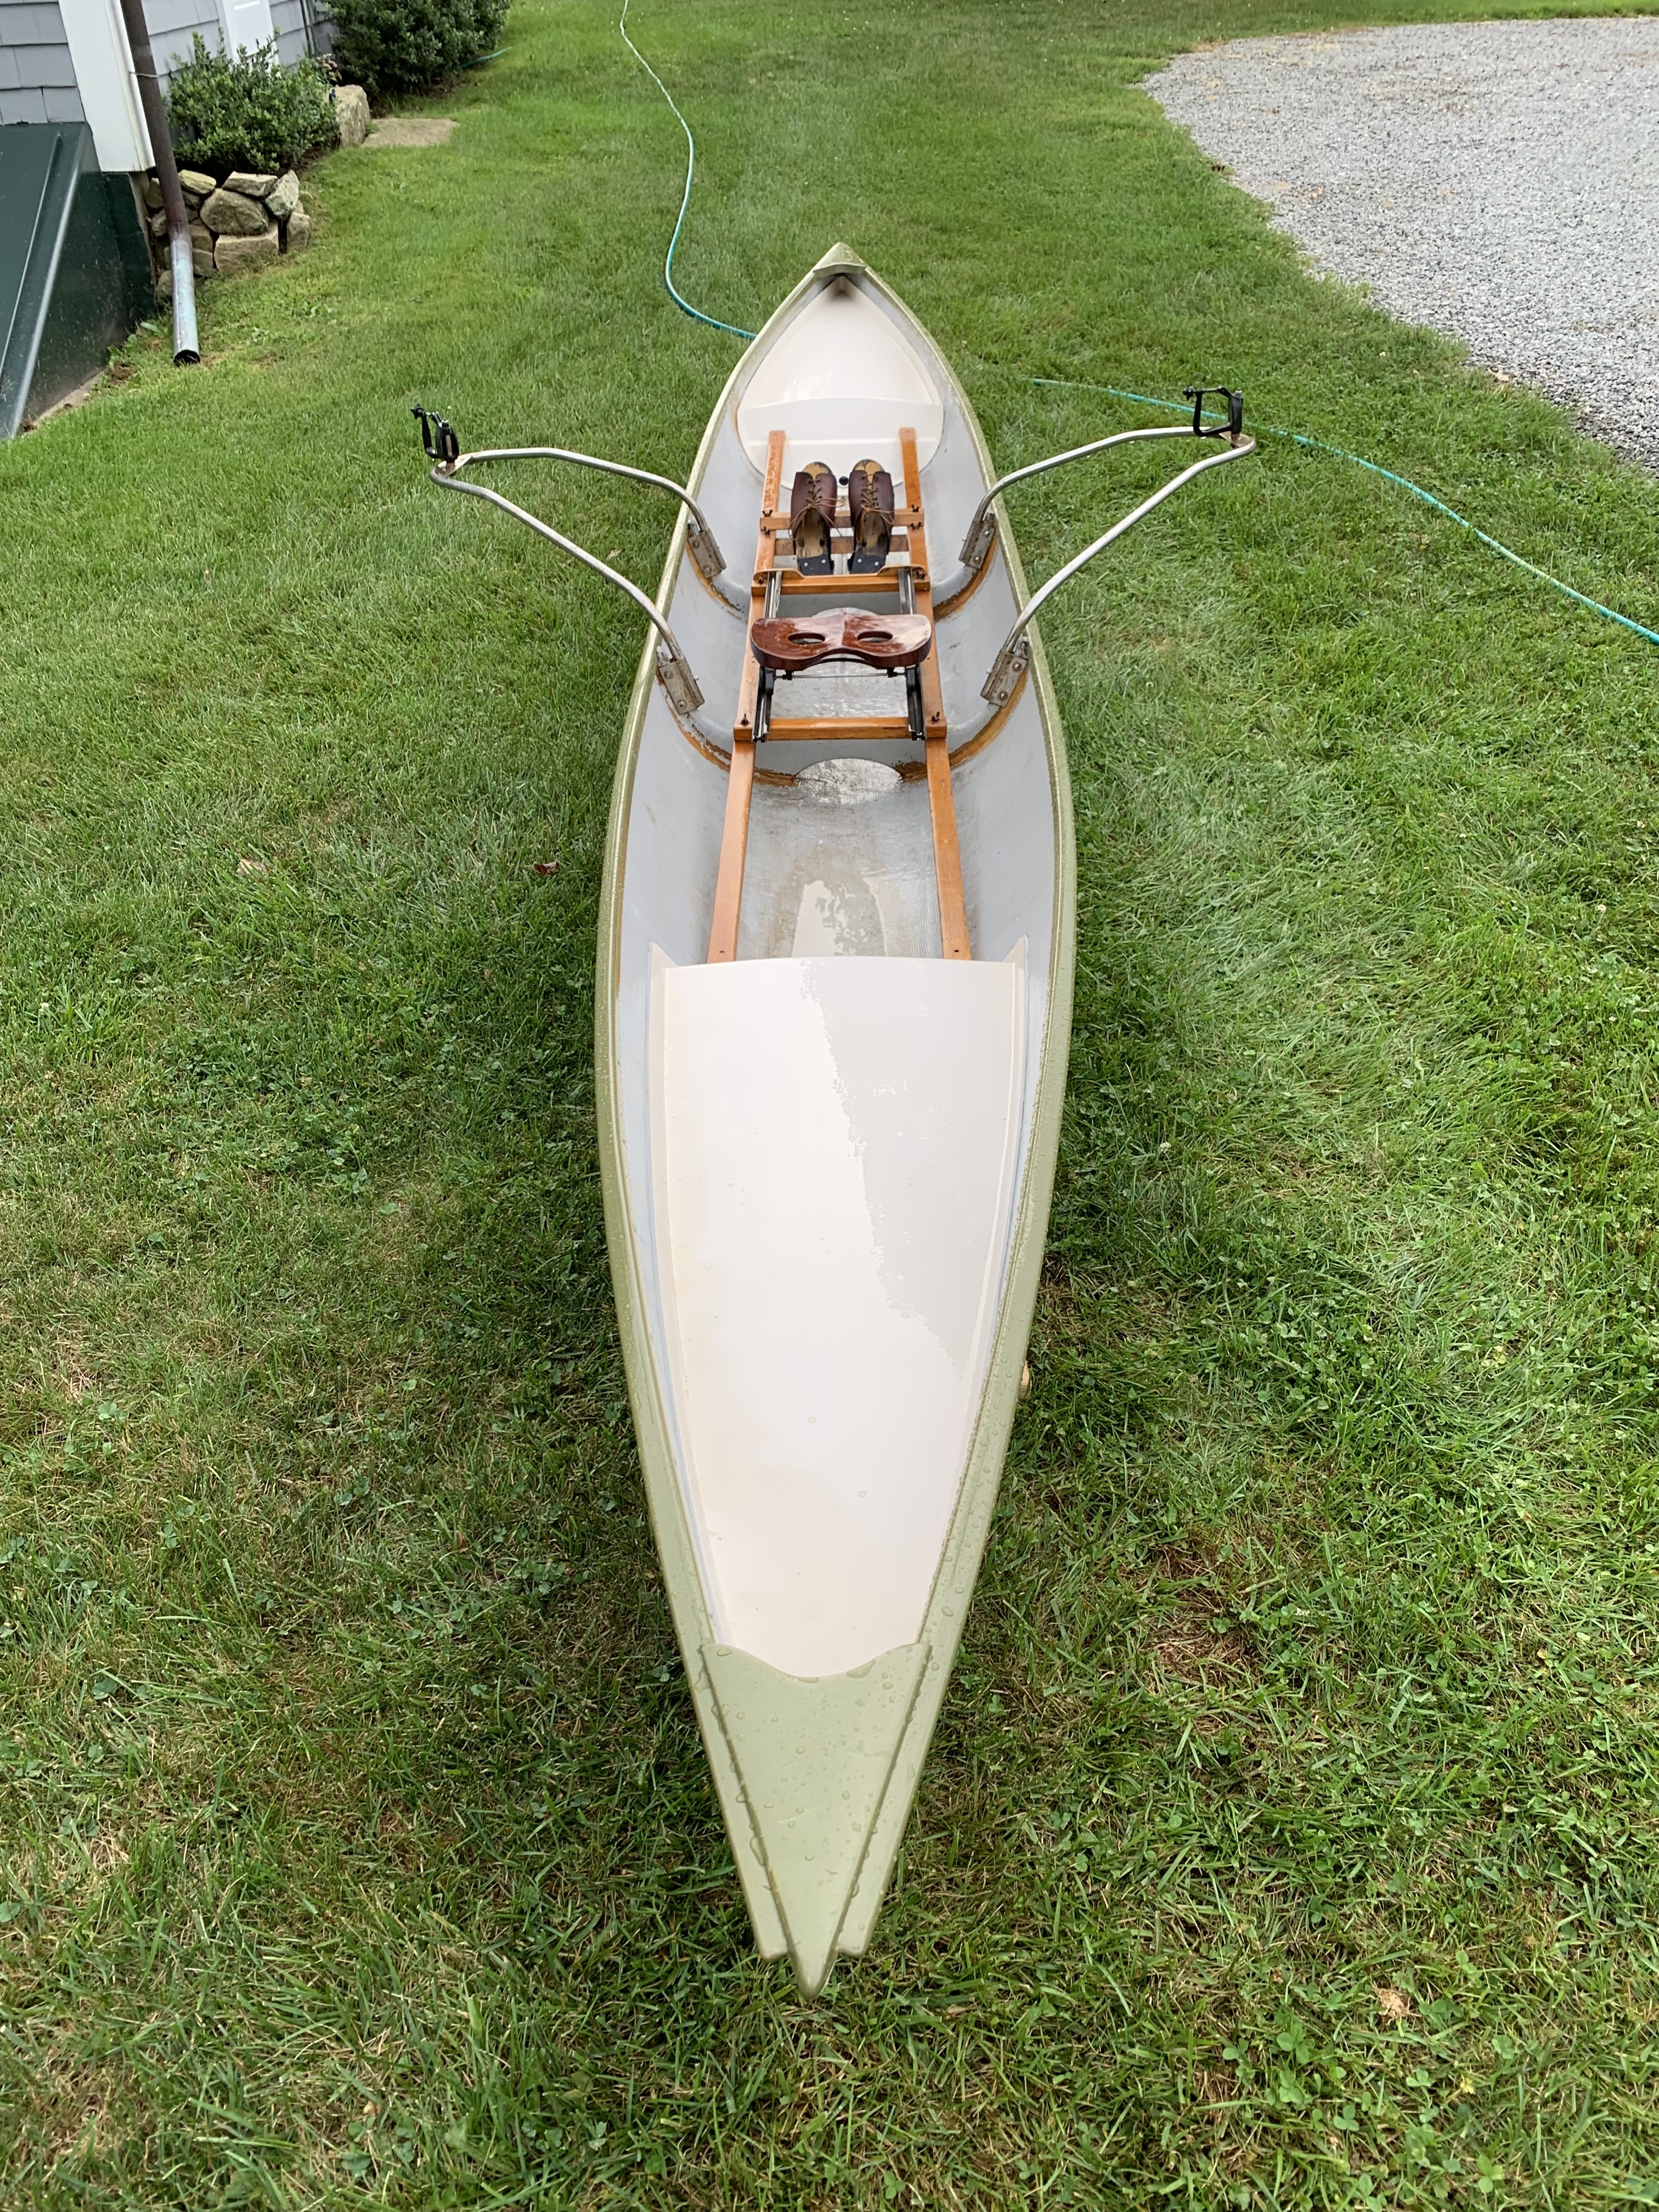 restored single person row boat with sliding seat outside